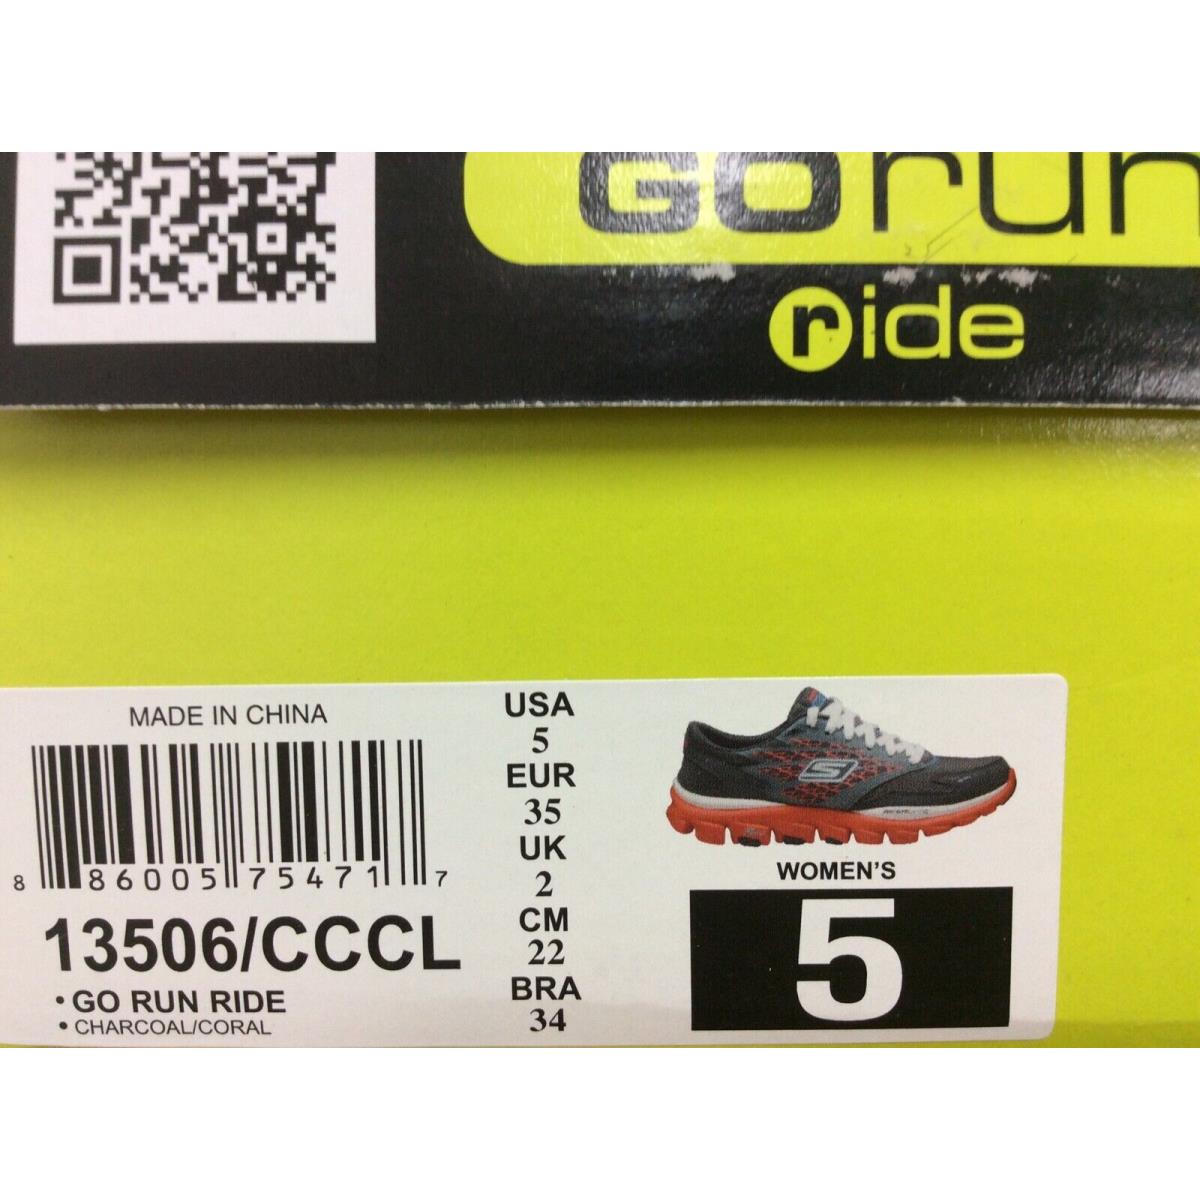 Skechers shoes Run Ride - Charcoal Coral 10